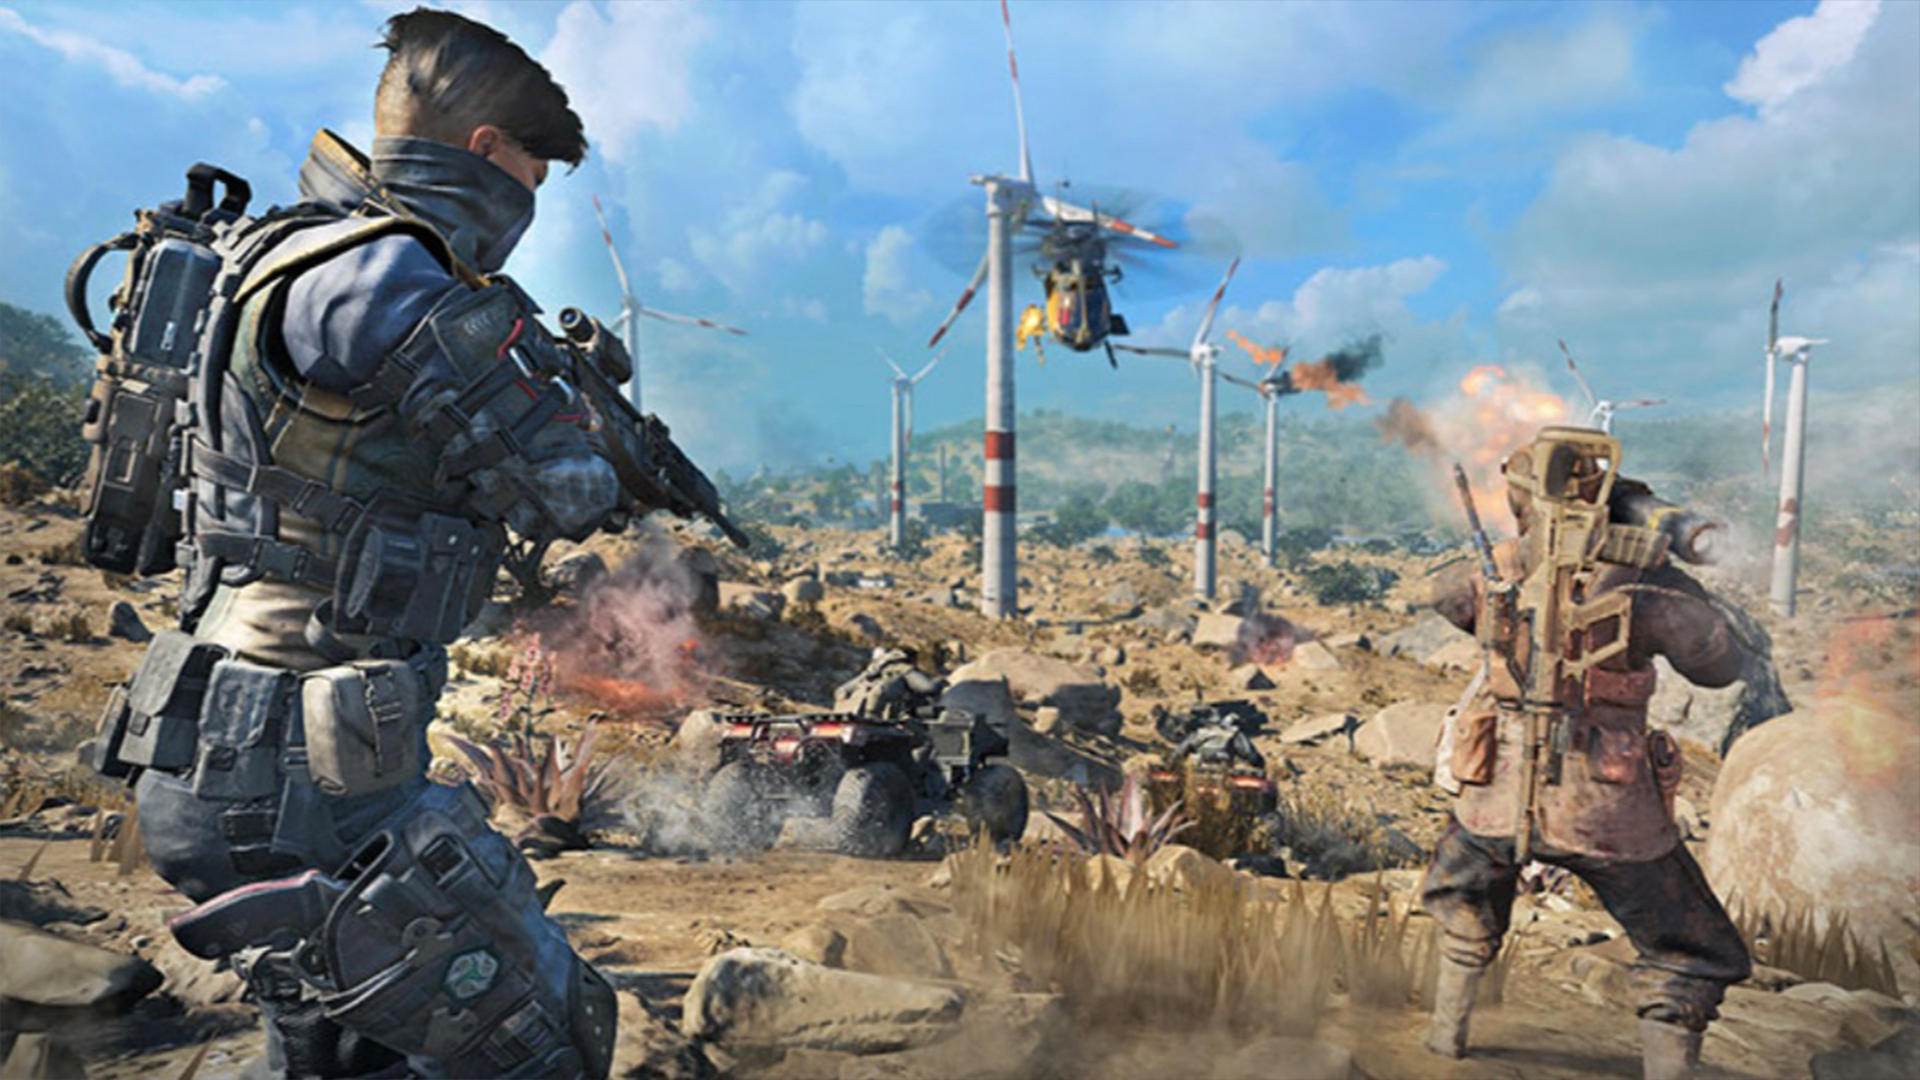 Call of Duty: Black Ops 4 screenshot for Blackout mode